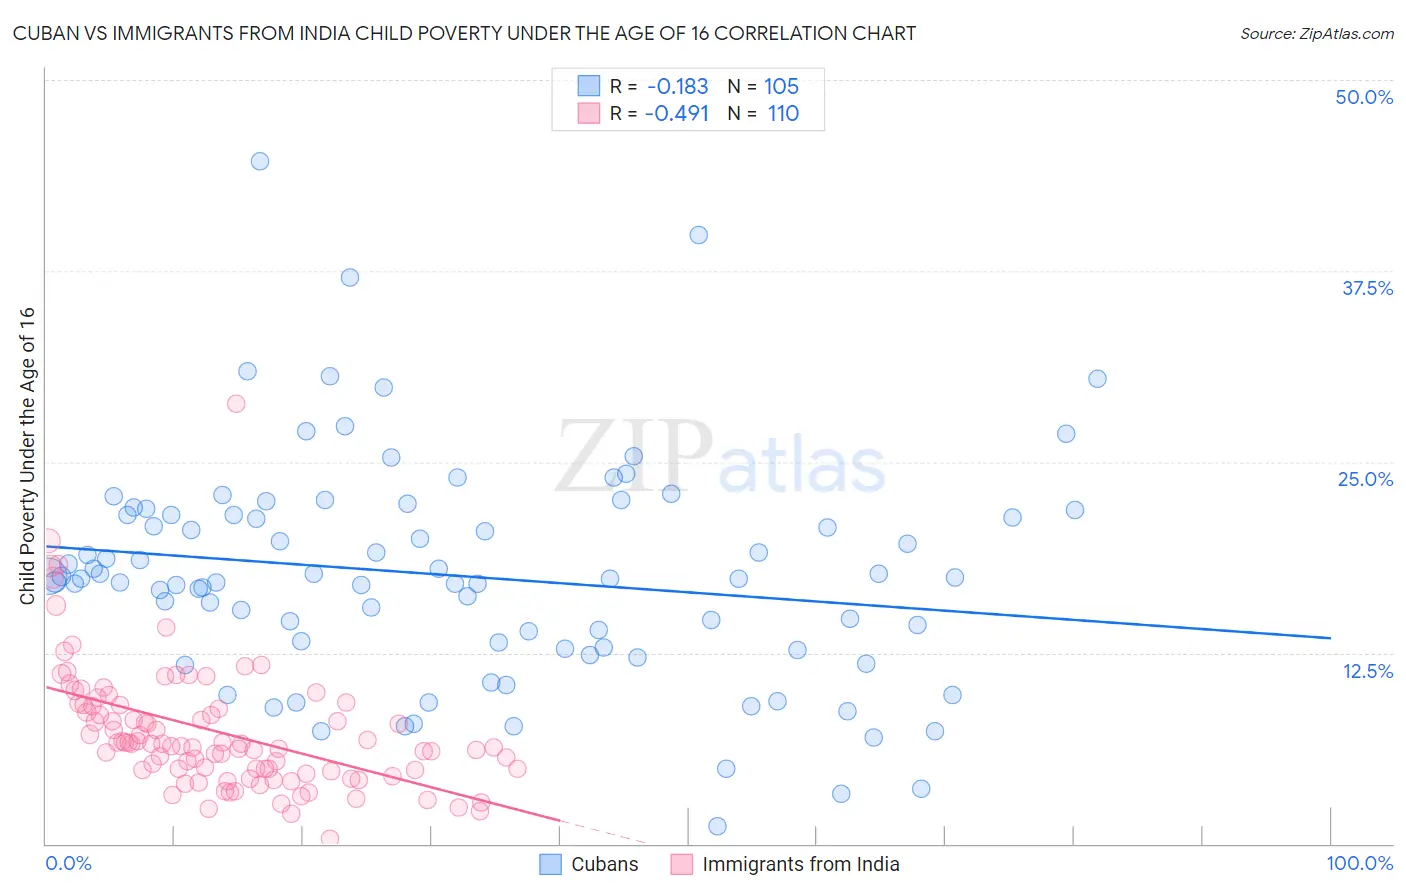 Cuban vs Immigrants from India Child Poverty Under the Age of 16